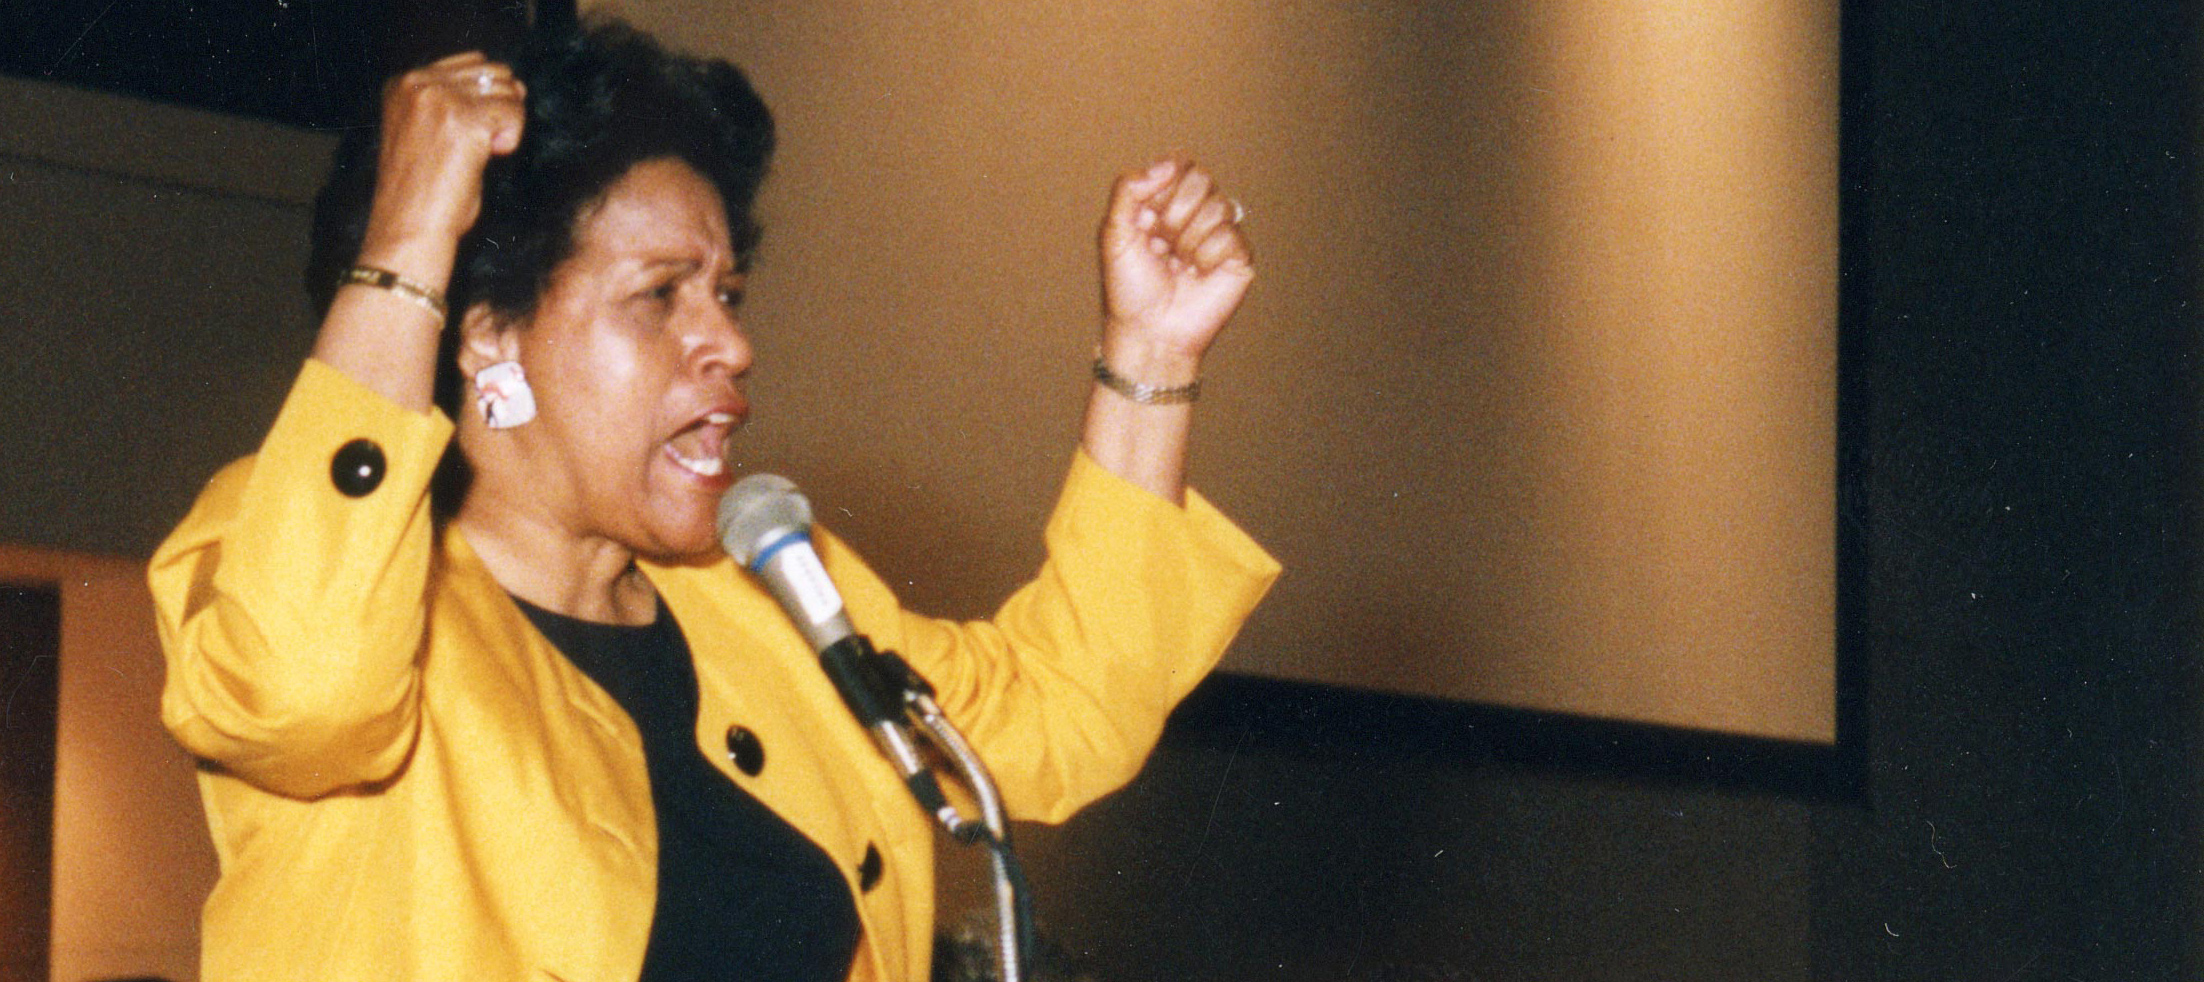 Image of Reena Evers speaking passionately to an audience.